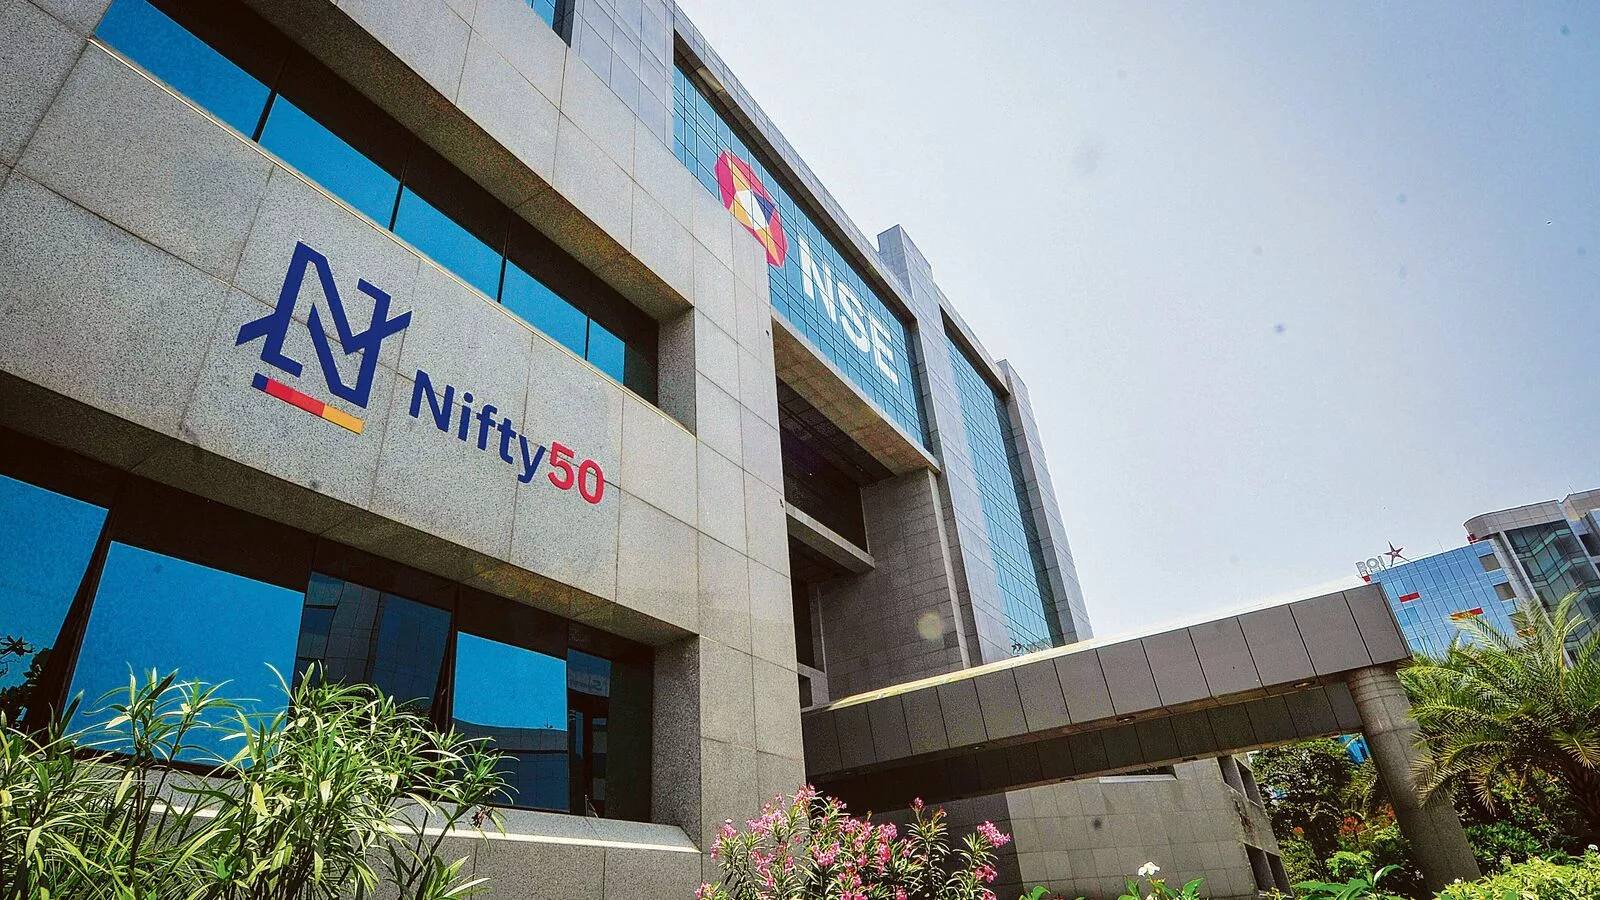 Nifty 50 Junior outperforms Nifty 50 in February; 12 stocks surge up to 30%